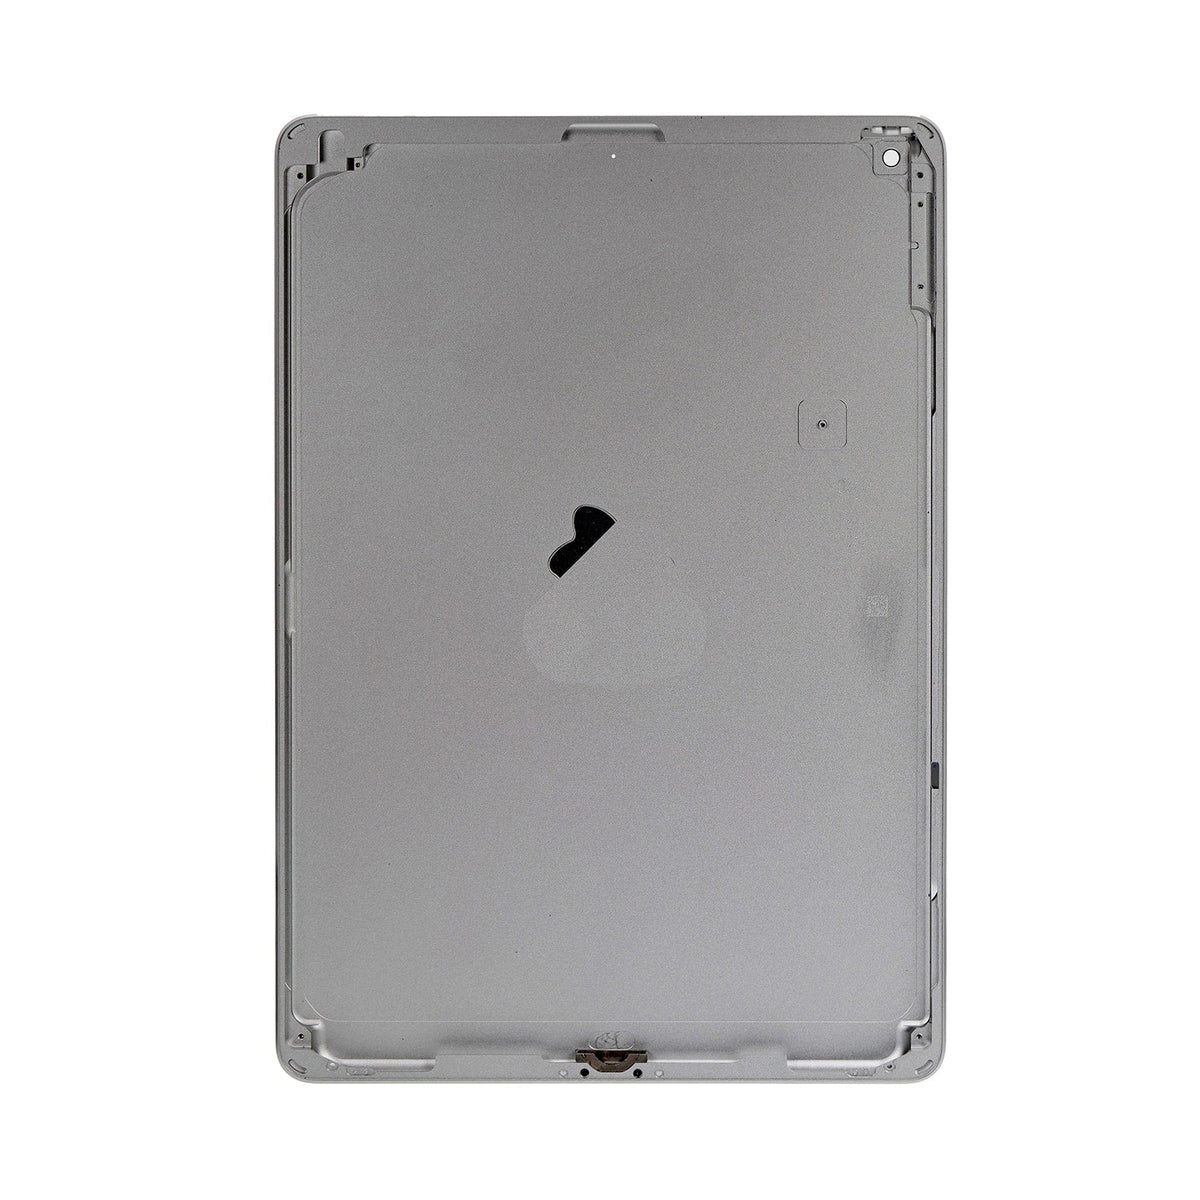 GREY BACK COVER (WIFI VERSION) FOR IPAD 7TH/8TH